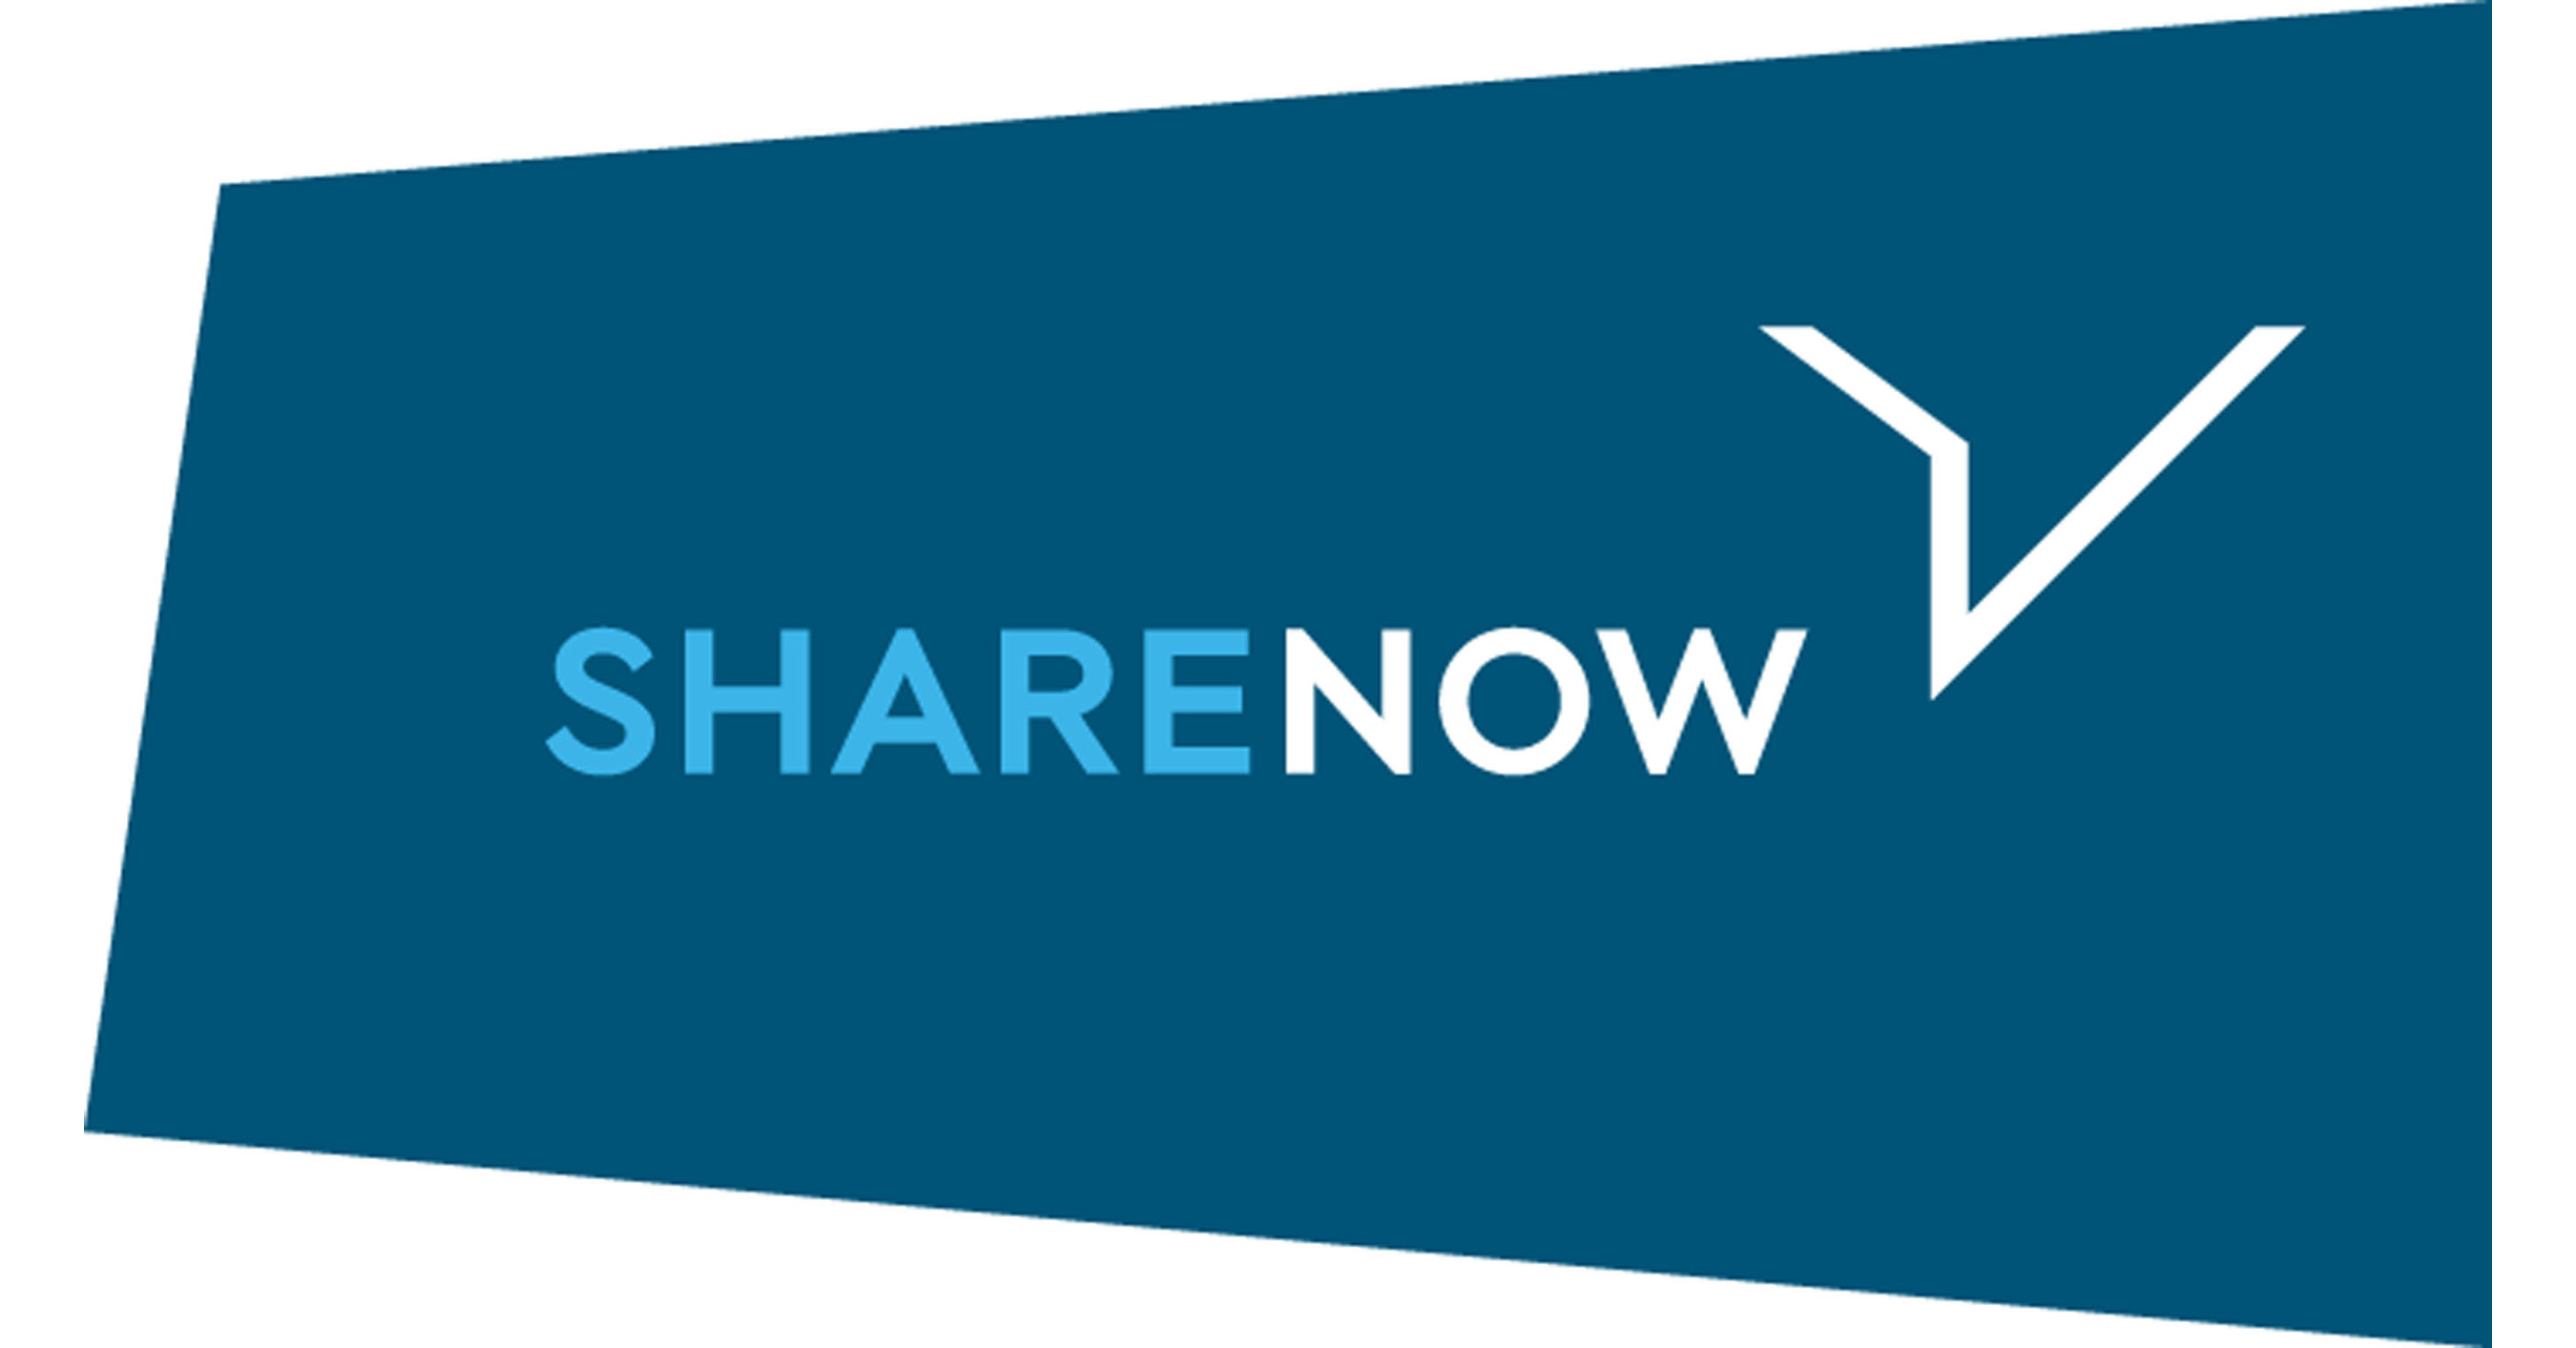 Car2Go And Drivenow Join Forces: Share Now To Become The Biggest  Free-Floating Carshare Provider Worldwide